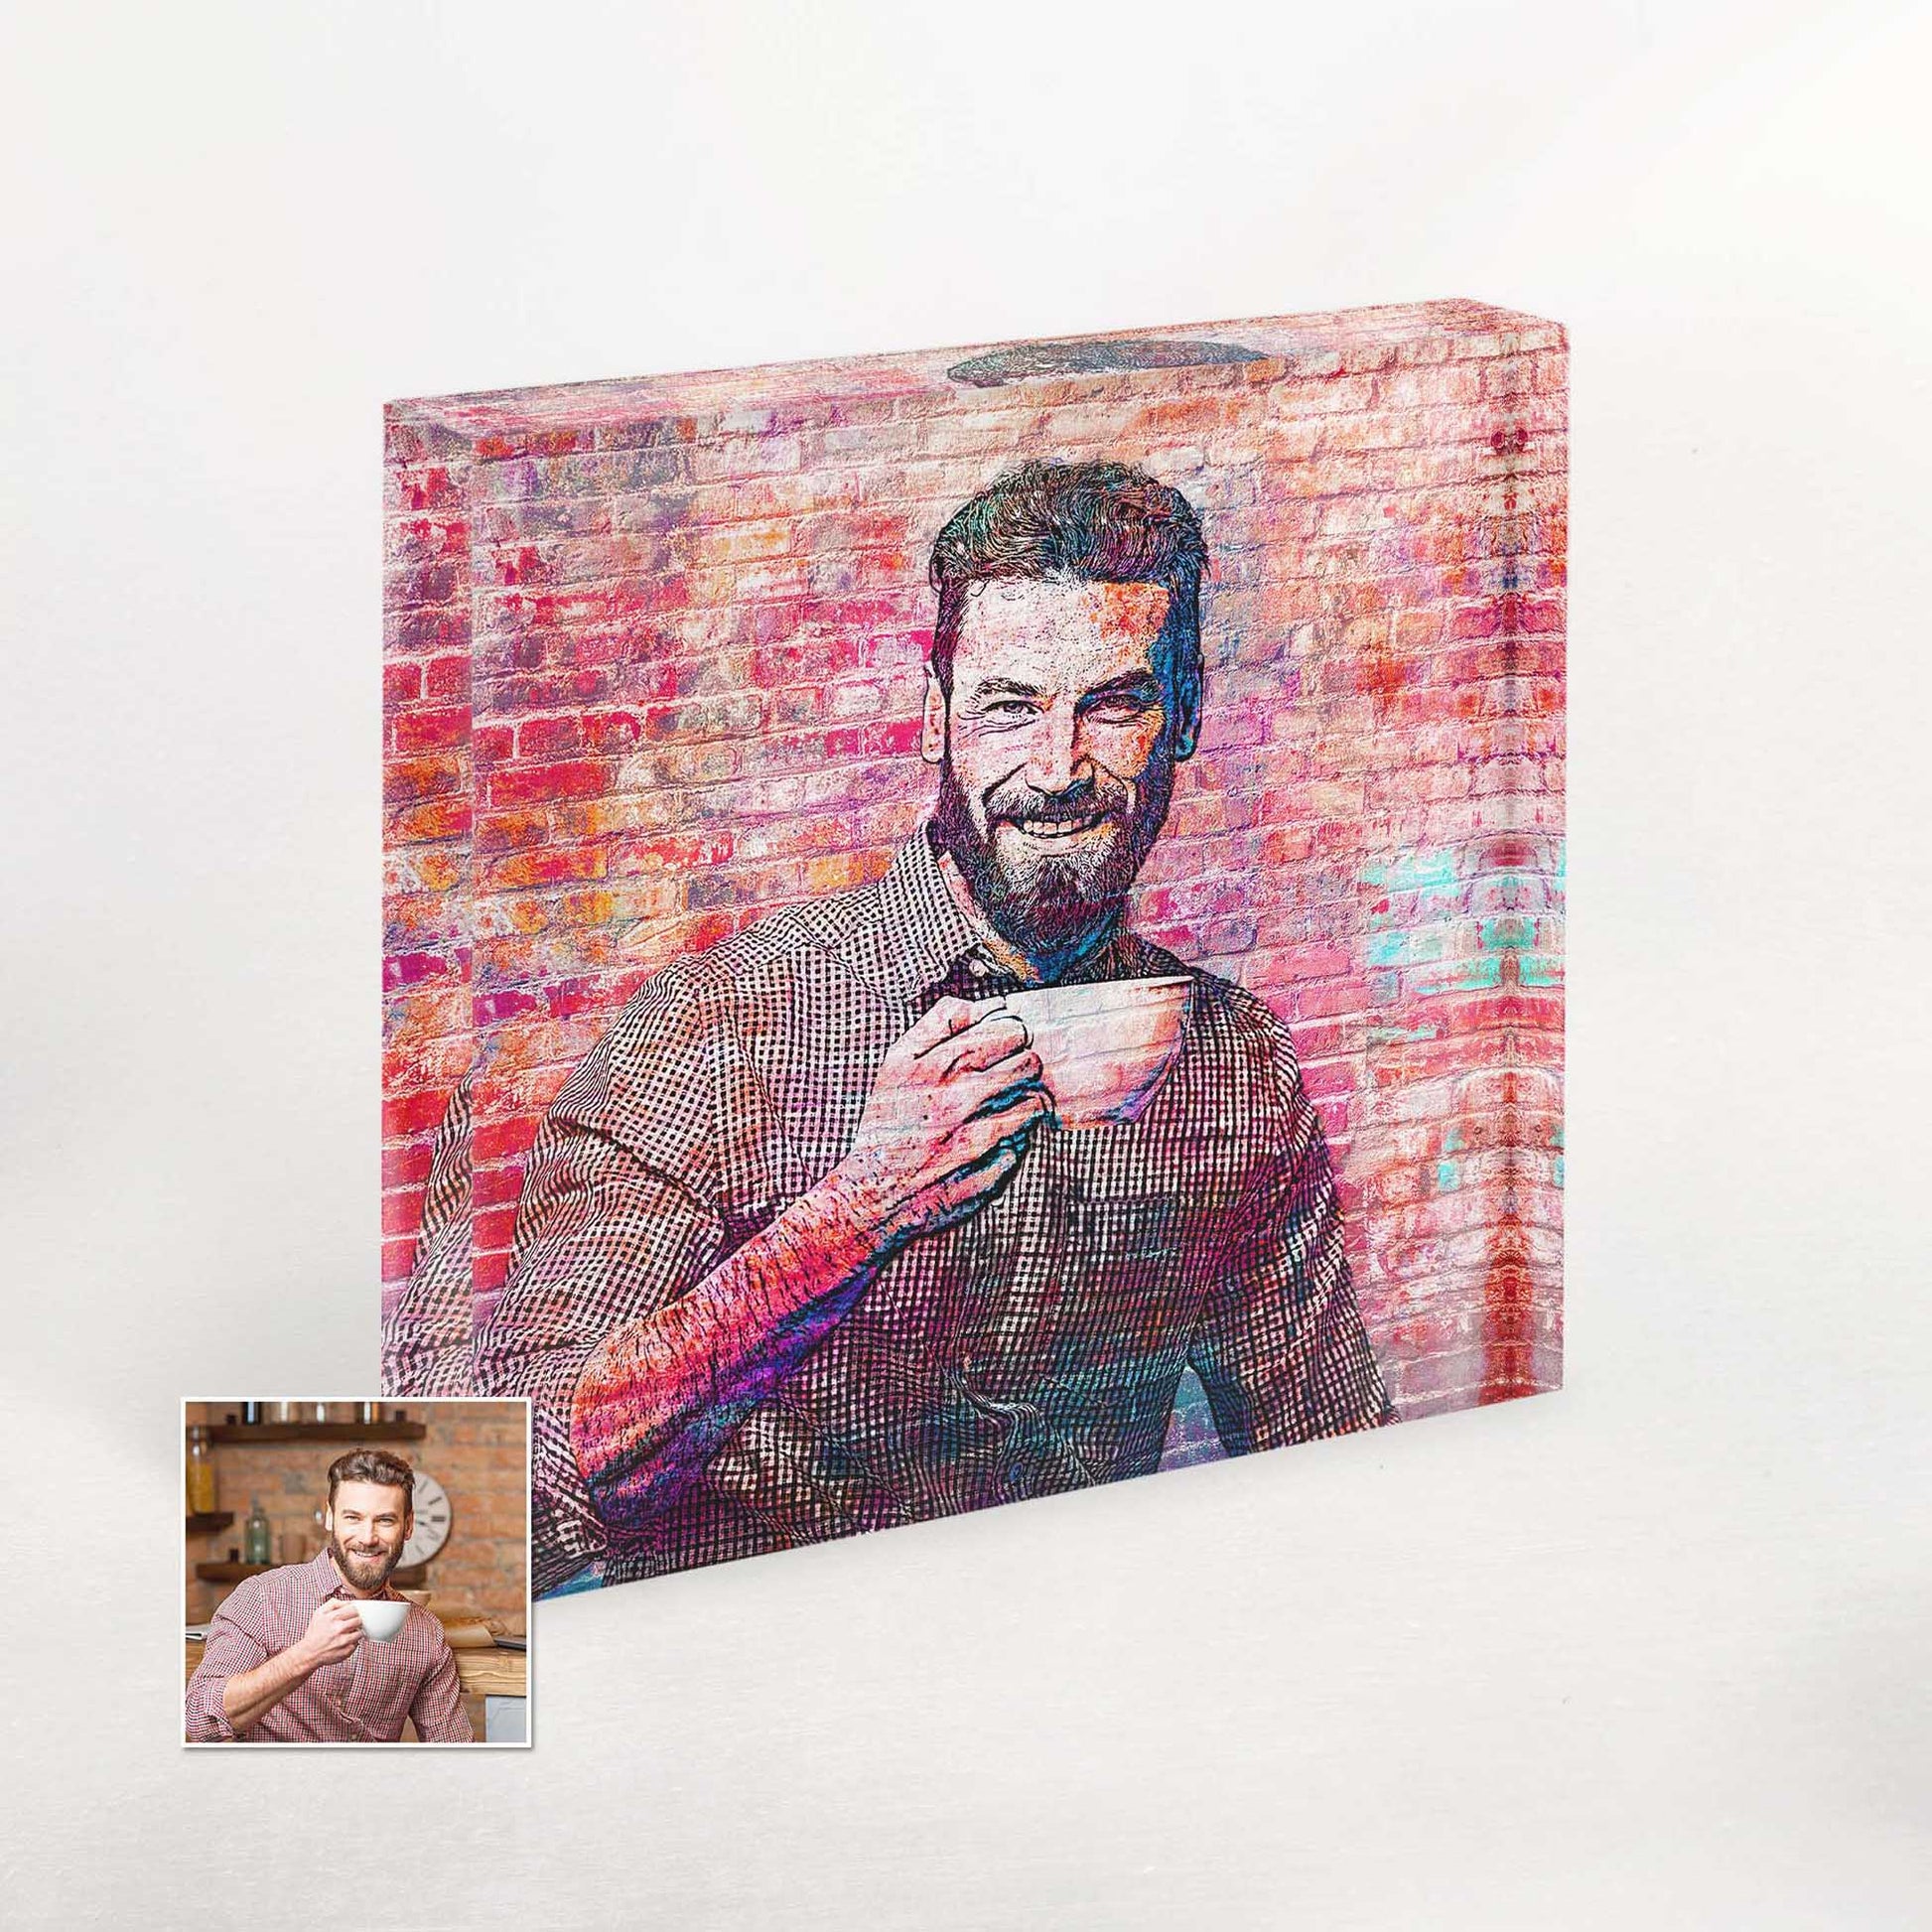 Add a splash of creativity to your space with Personalised Brick Graffiti Art Acrylic Block Photo. Perfect for anniversaries, birthdays, or as a gift for friends, this modern home decor piece showcases your cherished memories in a graffiti-inspired style.